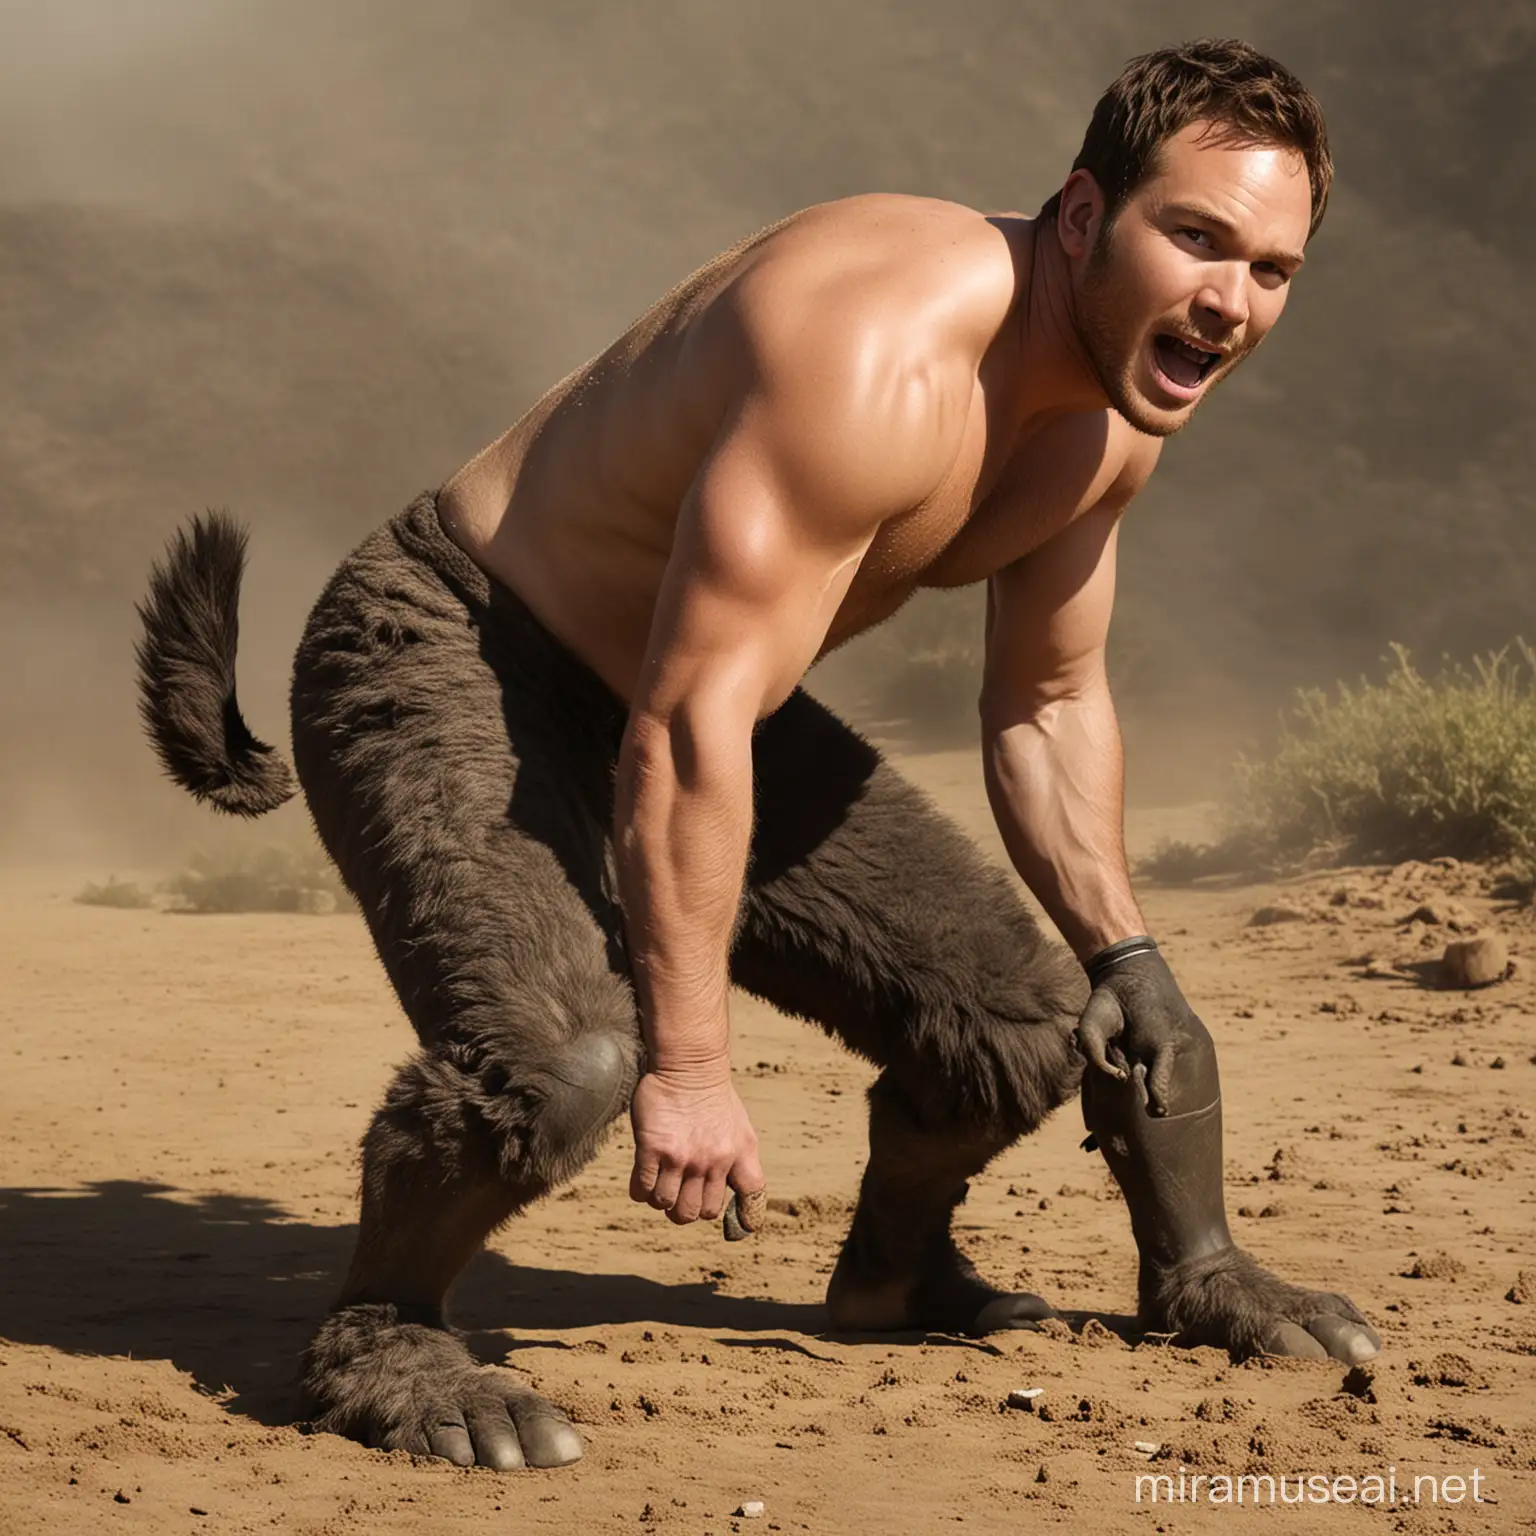 Chris Pratt on all fours transforming into a donkey. He has donkey ears. He has donkey legs. He has donkey hooves. He has a donkey tail. He has a complete donkey body and braying like a donkey. But his head is human.